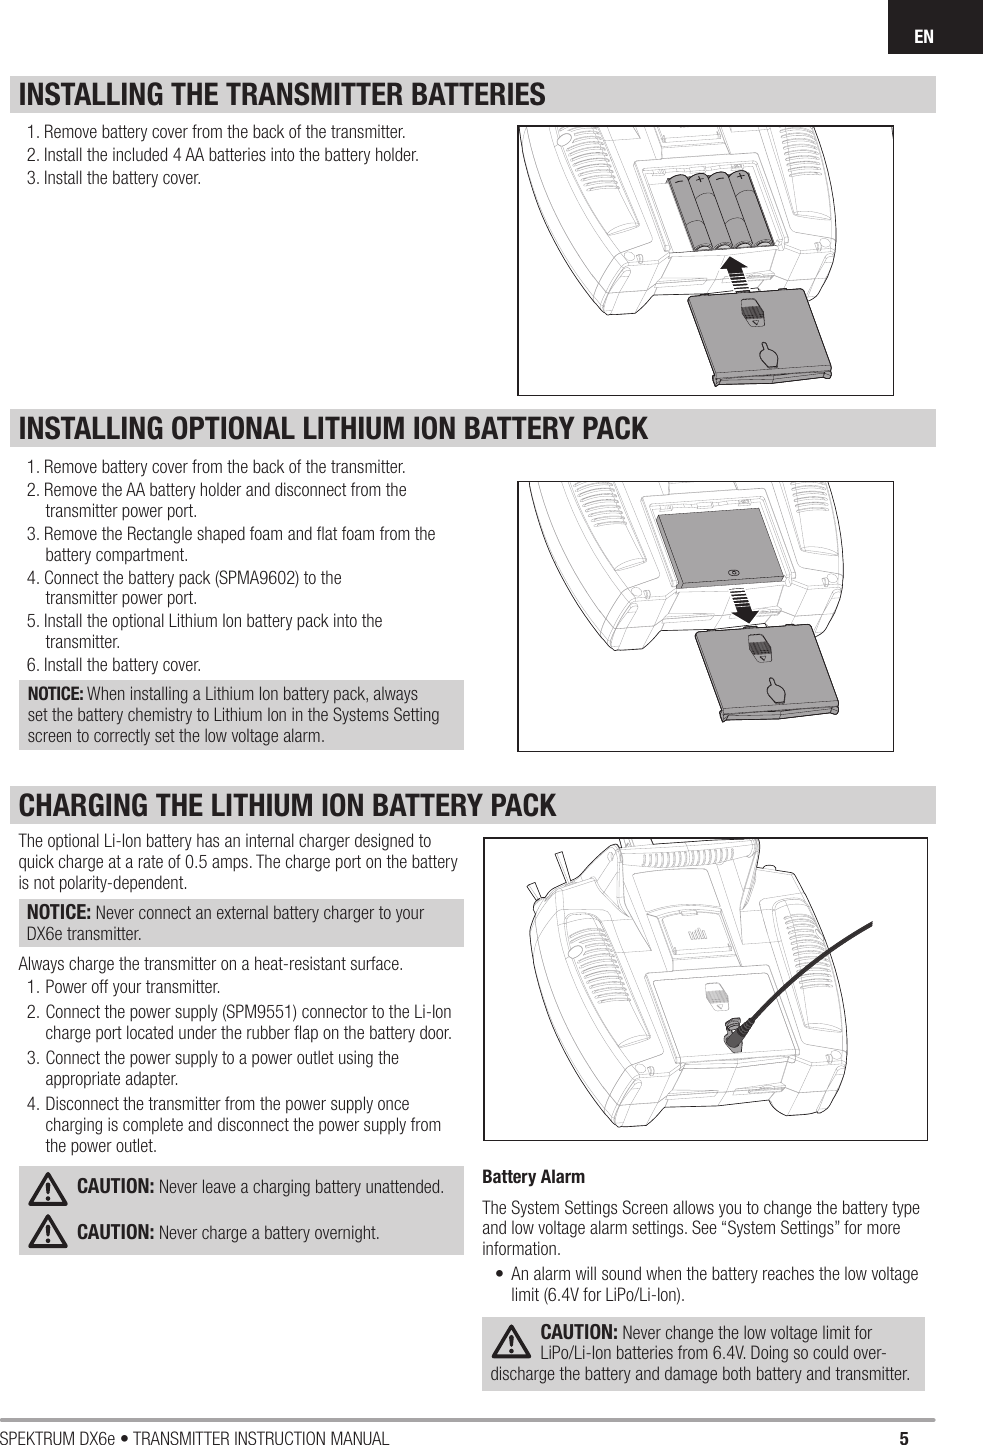 5SPEKTRUM DX6e • TRANSMITTER INSTRUCTION MANUALENINSTALLING OPTIONAL LITHIUM ION BATTERY PACKINSTALLING THE TRANSMITTER BATTERIES1. Remove battery cover from the back of the transmitter.2. Remove the AA battery holder and disconnect from the transmitter power port.3. Remove the Rectangle shaped foam and ﬂ at foam from the battery compartment.4. Connect the battery pack (SPMA9602) to the transmitter power port.5. Install the optional Lithium Ion battery pack into the transmitter.6. Install the battery cover.NOTICE: When installing a Lithium Ion battery pack, always set the battery chemistry to Lithium Ion in the Systems Setting screen to correctly set the low voltage alarm.1. Remove battery cover from the back of the transmitter.2. Install the included 4 AA batteries into the battery holder.3. Install the battery cover.The optional Li-Ion battery has an internal charger designed to quick charge at a rate of 0.5 amps. The charge port on the battery is not polarity-dependent. NOTICE: Never connect an external battery charger to your DX6e transmitter. Always charge the transmitter on a heat-resistant surface.1. Power off your transmitter. 2. Connect the power supply (SPM9551) connector to the Li-Ion charge port located under the rubber ﬂ ap on the battery door. 3. Connect the power supply to a power outlet using the appropriate adapter. 4. Disconnect the transmitter from the power supply once charging is complete and disconnect the power supply from the power outlet.CAUTION: Never leave a charging battery unattended.CAUTION: Never charge a battery overnight.Battery AlarmThe System Settings Screen allows you to change the battery type and low voltage alarm settings. See “System Settings” for more information.•  An alarm will sound when the battery reaches the low voltage limit (6.4V for LiPo/Li-Ion).CAUTION: Never change the low voltage limit for LiPo/Li-Ion batteries from 6.4V. Doing so could over-discharge the battery and damage both battery and transmitter.CHARGING THE LITHIUM ION BATTERY PACK